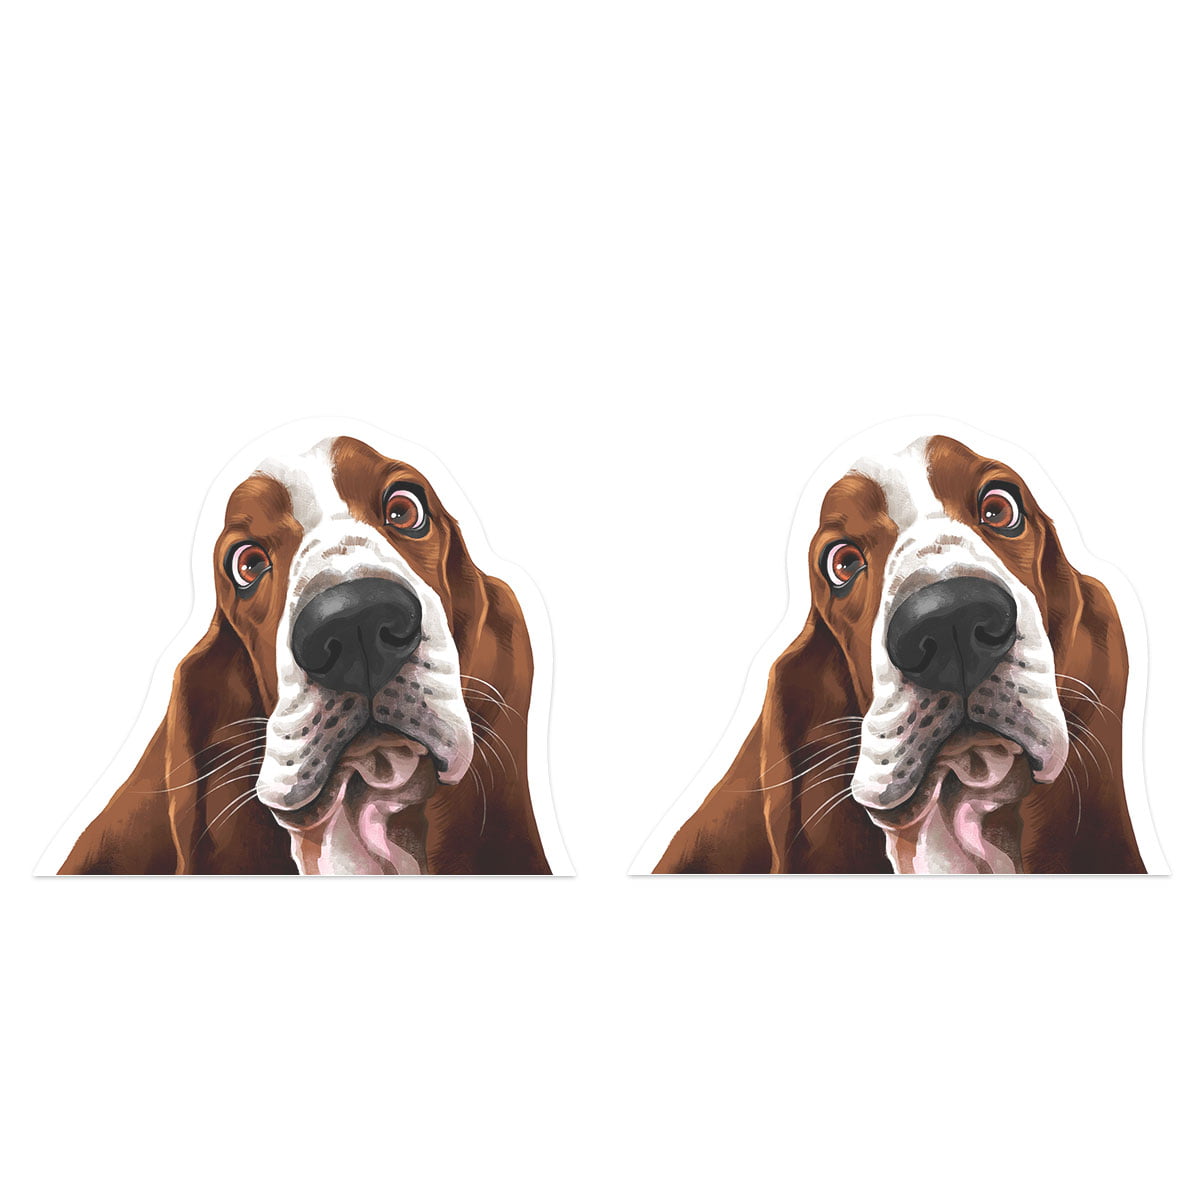 2 Pieces Set Bull Terrier Dog  Sticker Decals with custom text 20 Colors To Choose From U.S.A Free Shipping